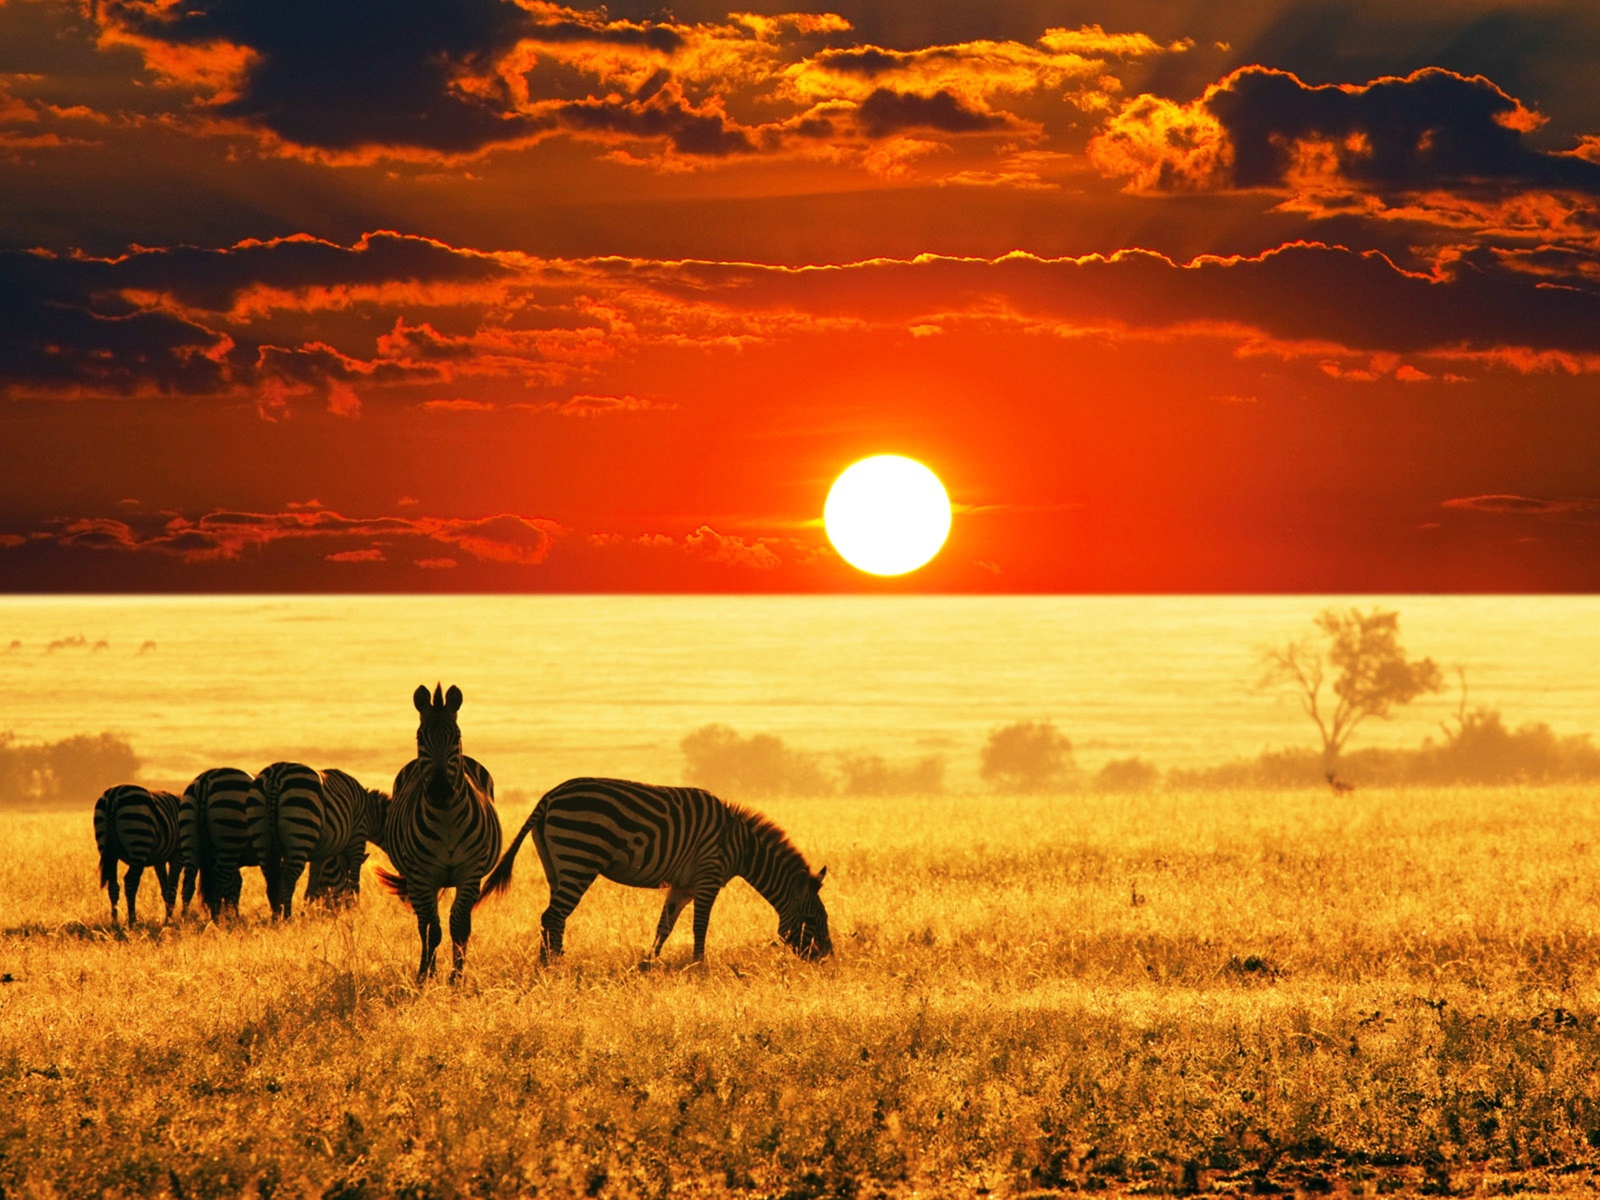 A herd of zebras grazes in the savannah at sunset